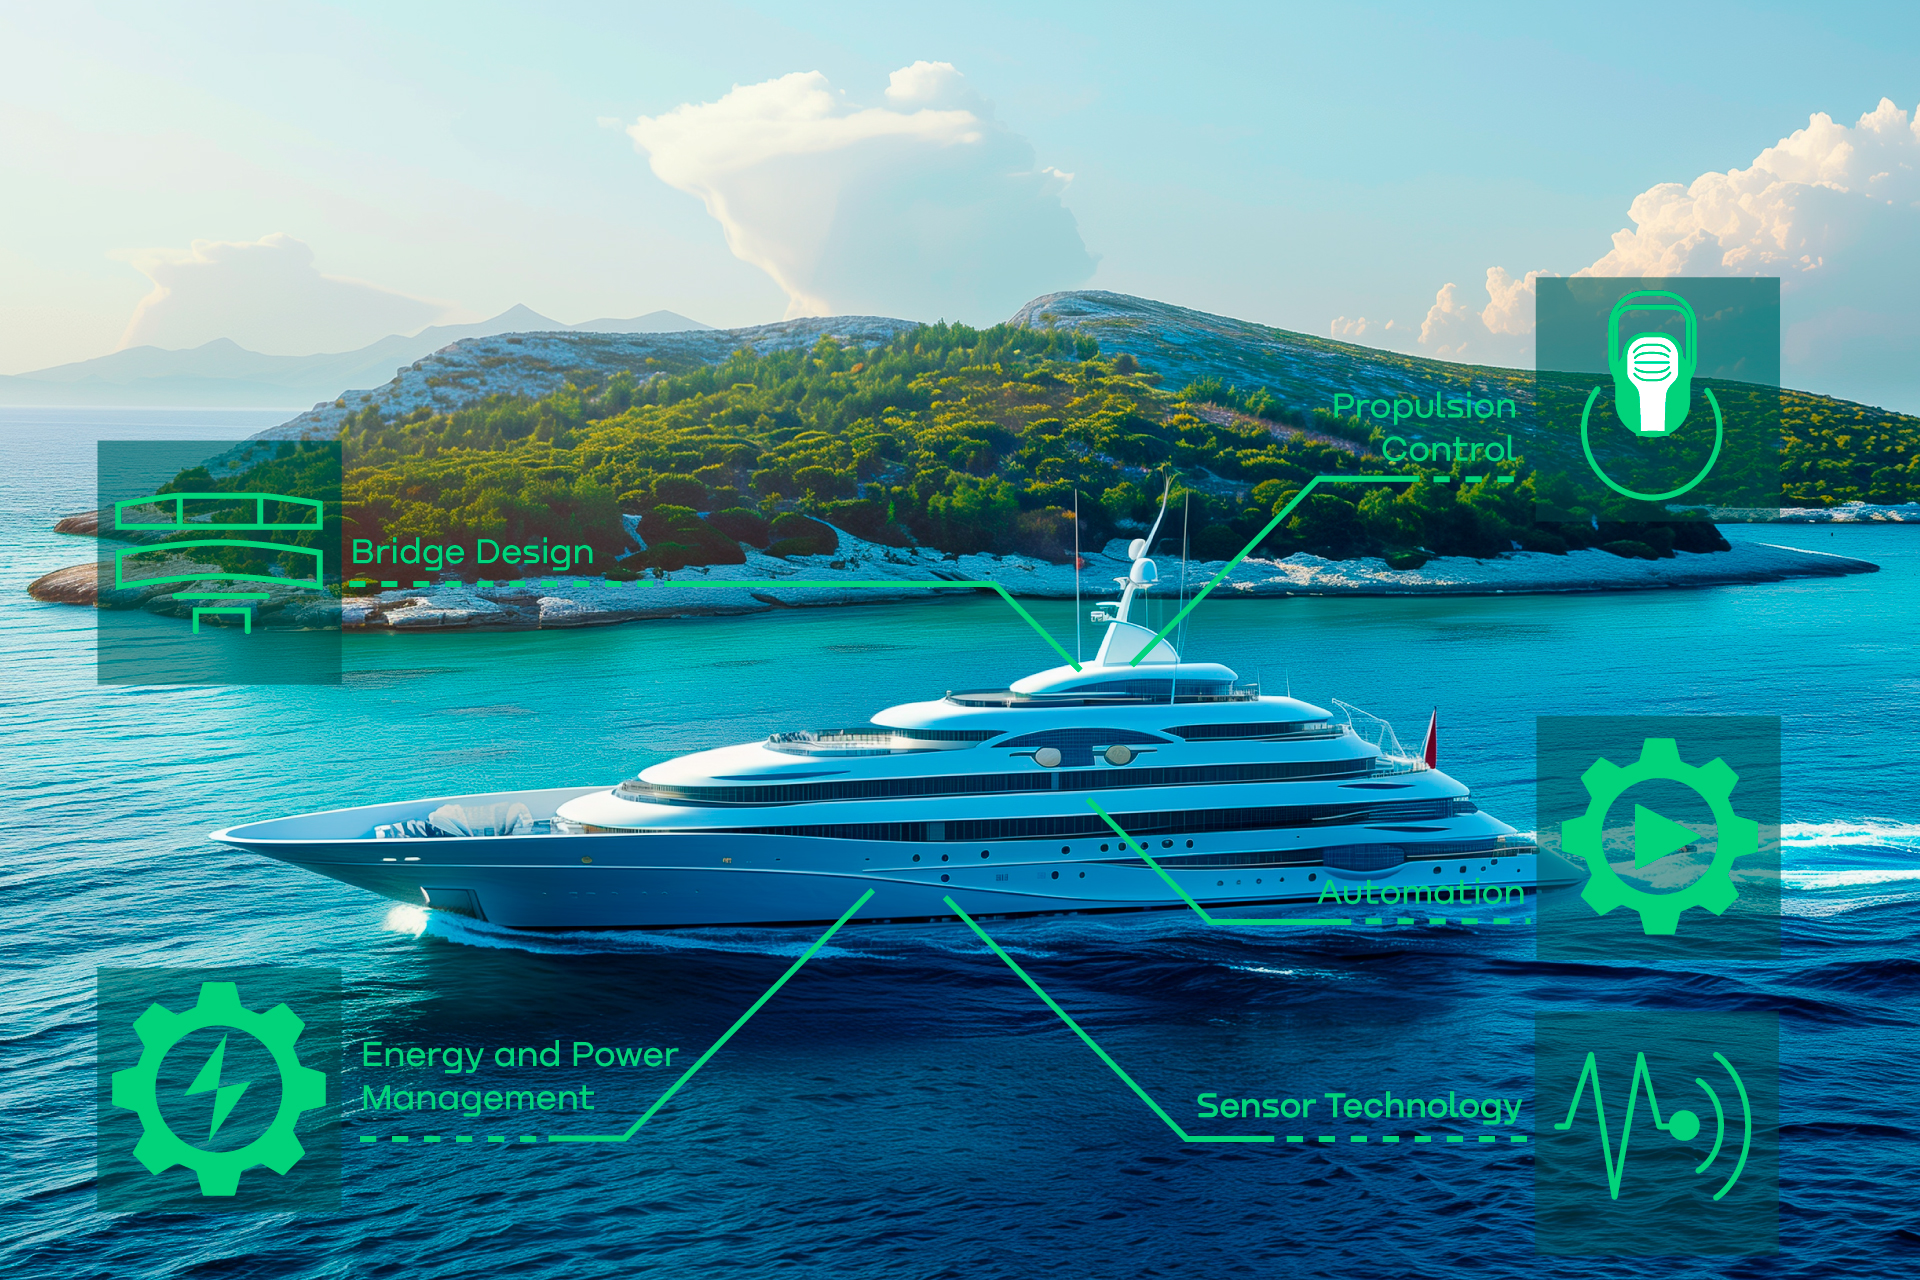 The image shows a megayacht in front of a small green island. Over the image is a layer with green icons showing symbols from the product portfolio for megayachts: Automation, propulsion control, energy management, bridge design and sensor technology